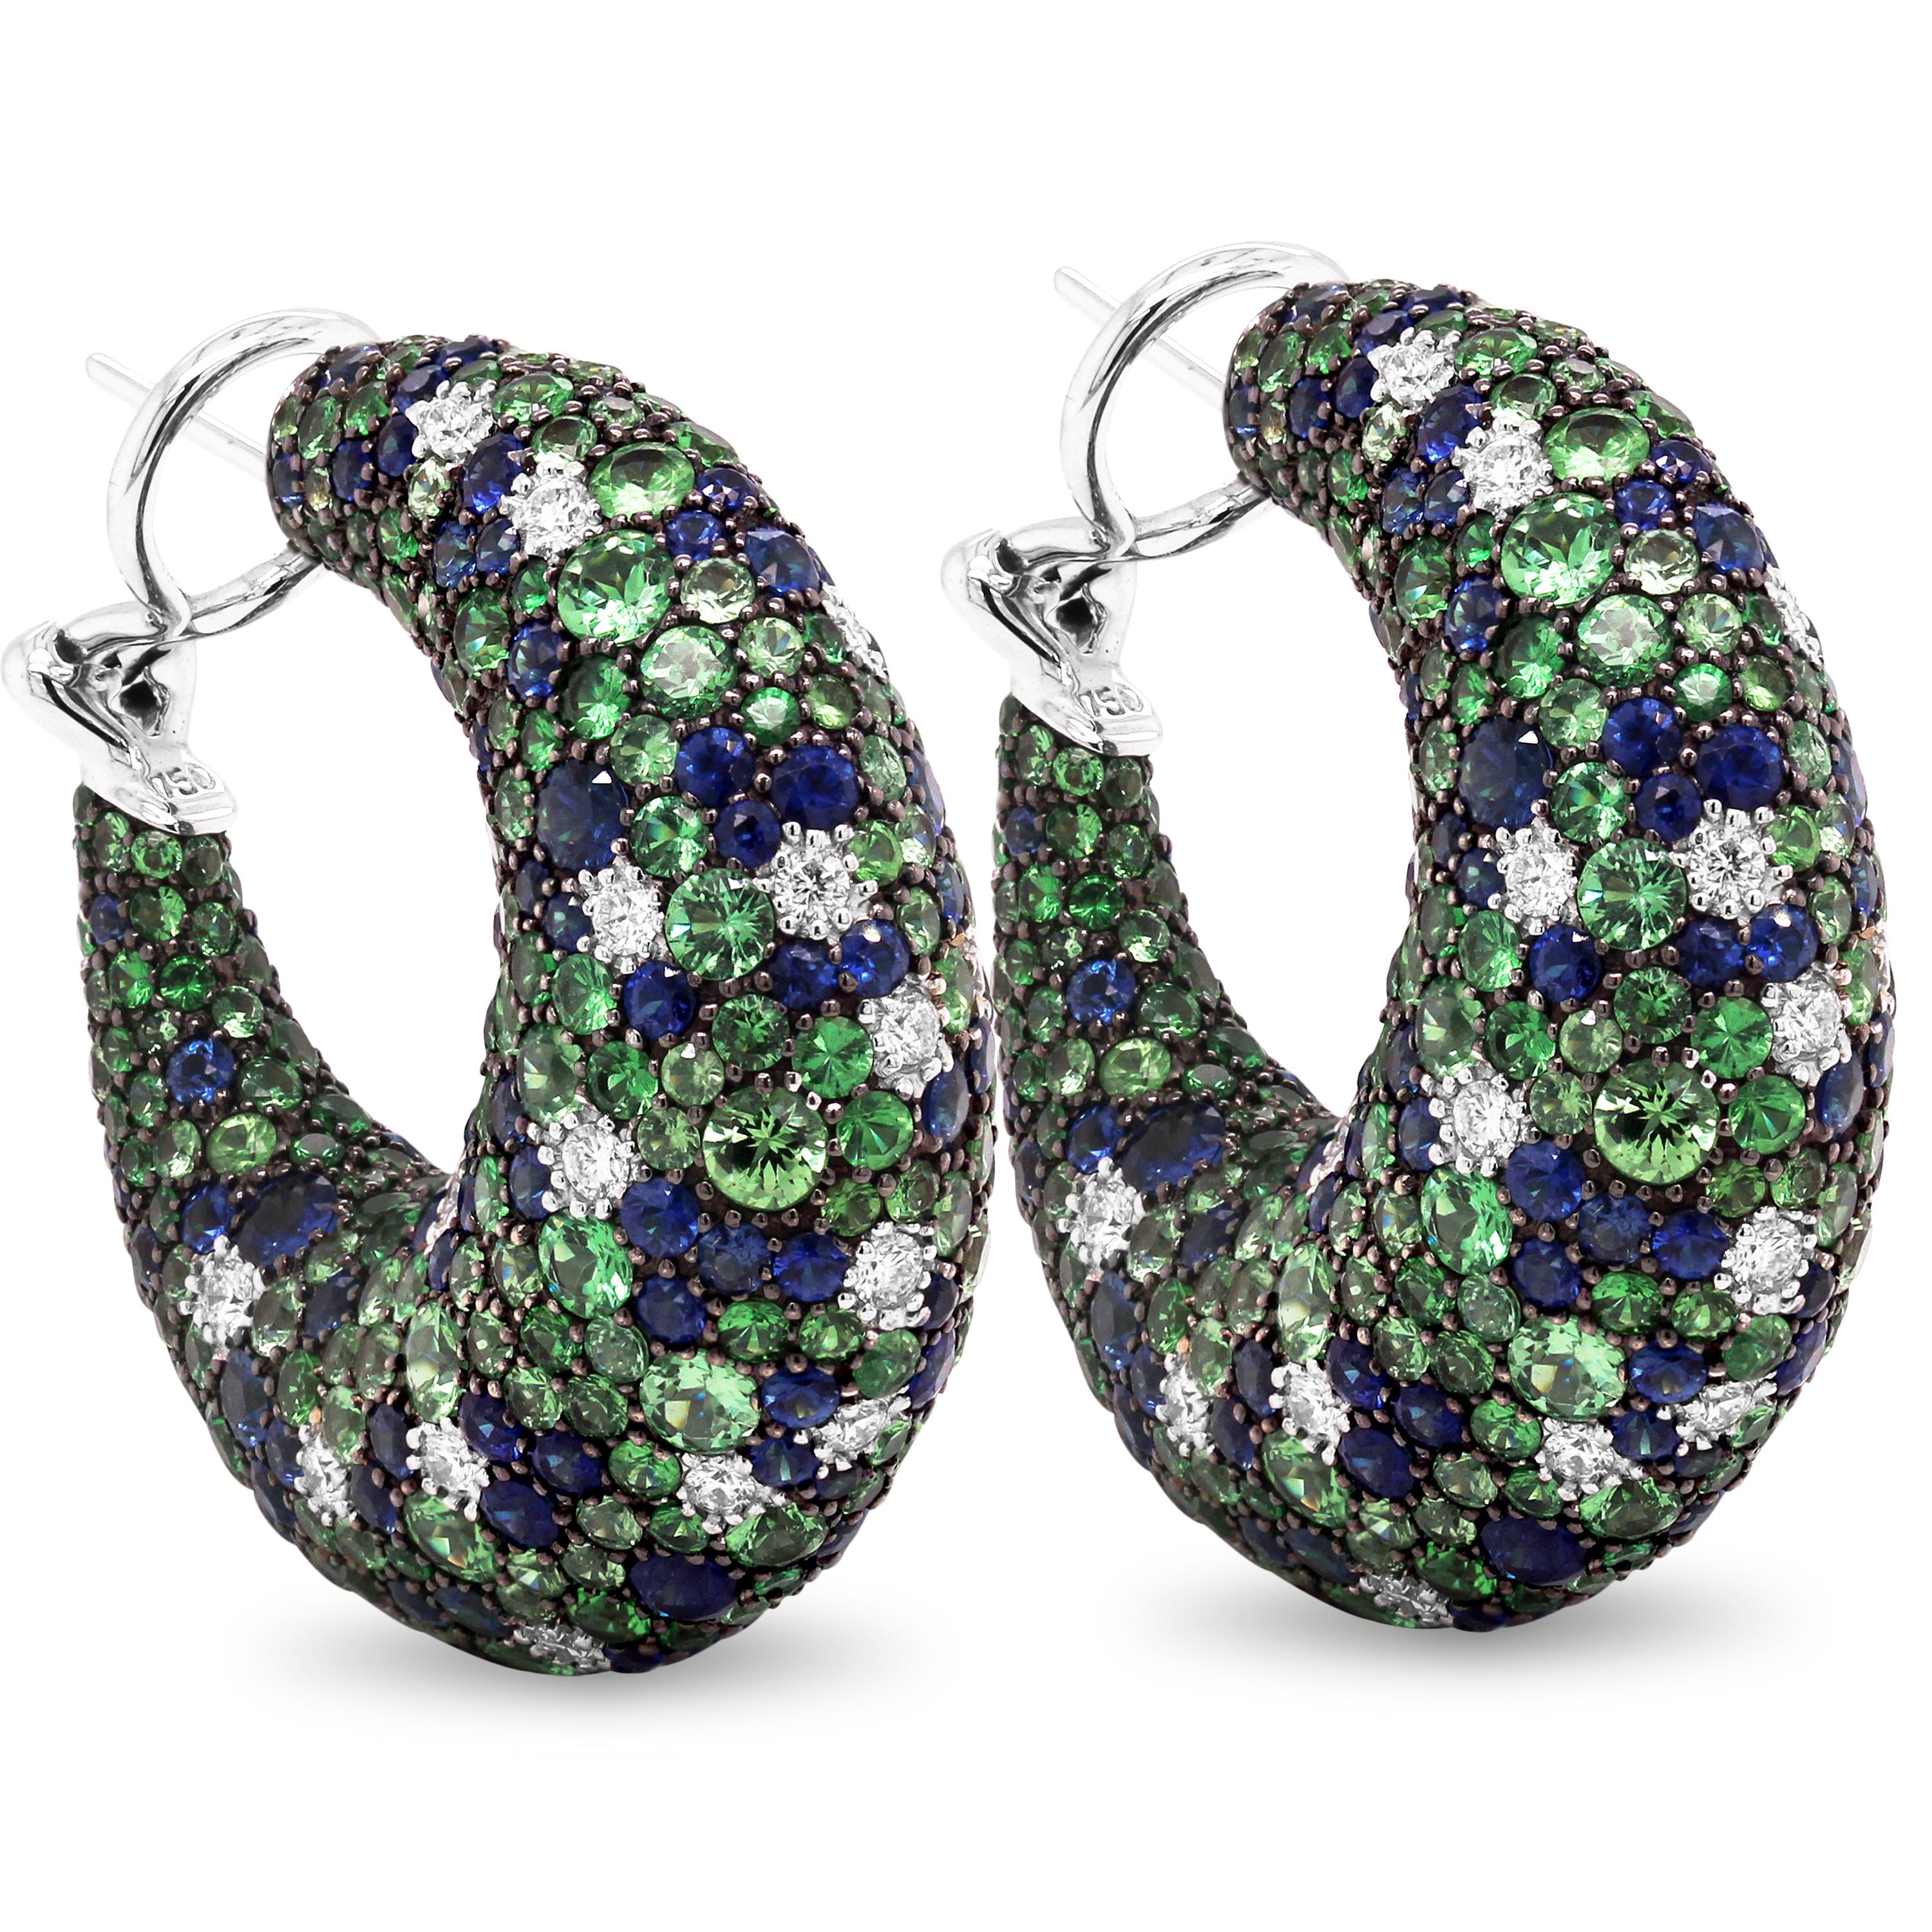 Tsavorite Blue Sapphire Diamond 18K White Gold Inside Out Hoop Earrings

These earrings are to die for with this exceptional design that features shaded Tsavorites from light to dark green mixed with the blue sapphires and diamonds. Stones are set